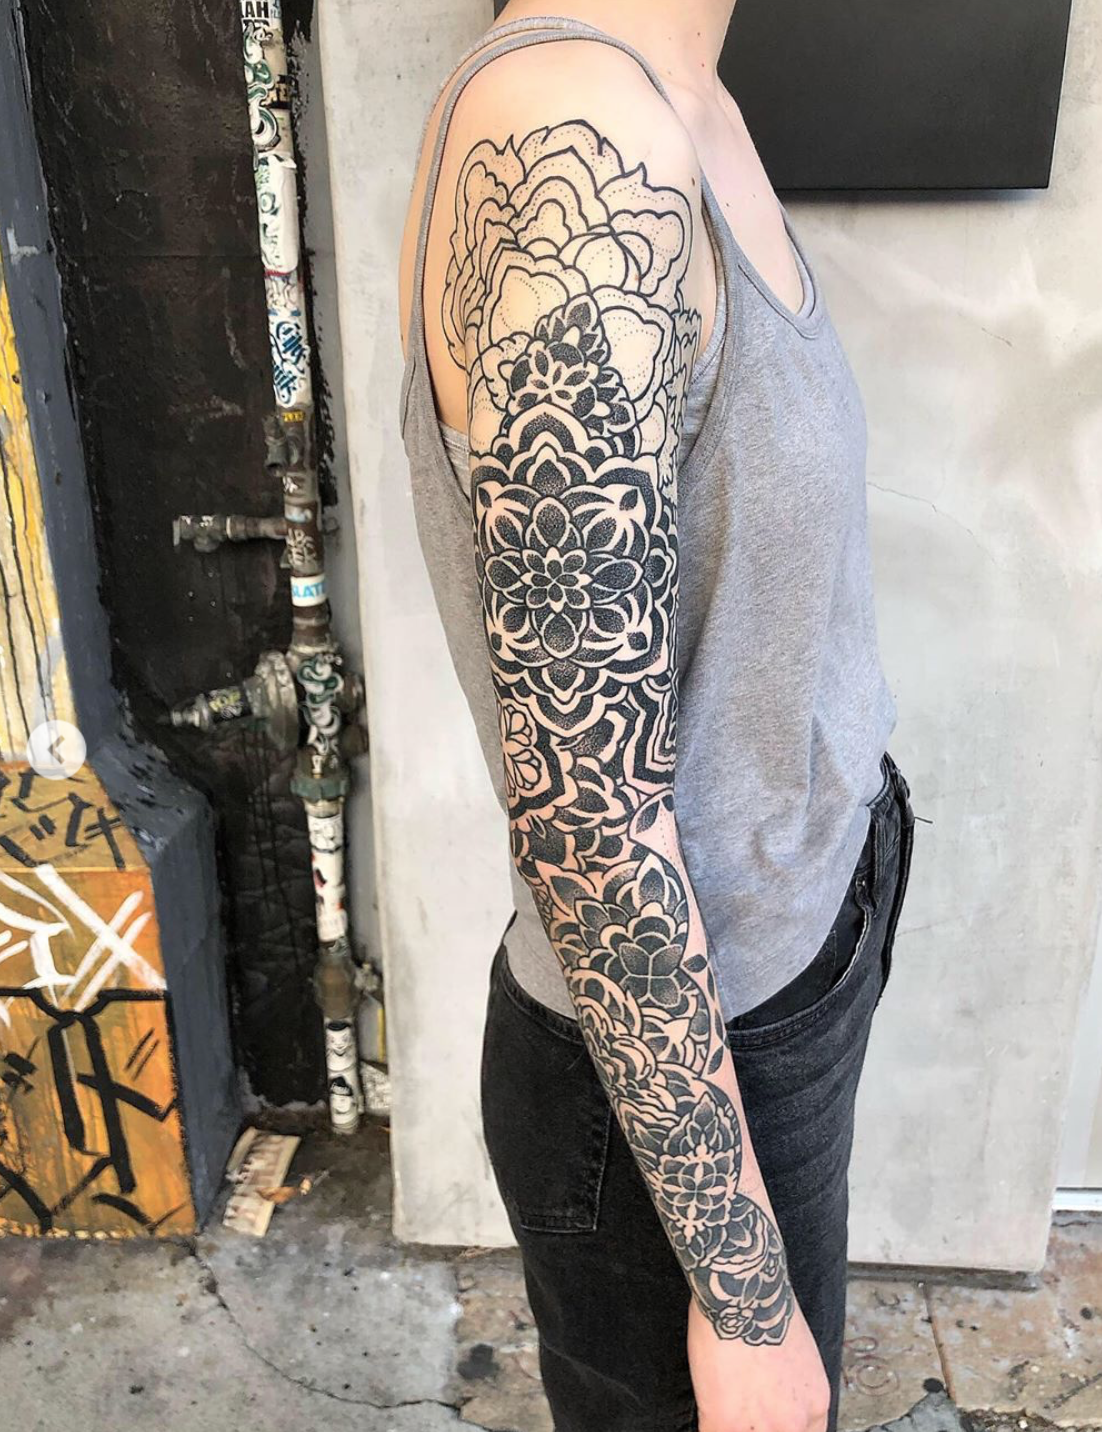 Sleeve tattoo by Grace Neutral